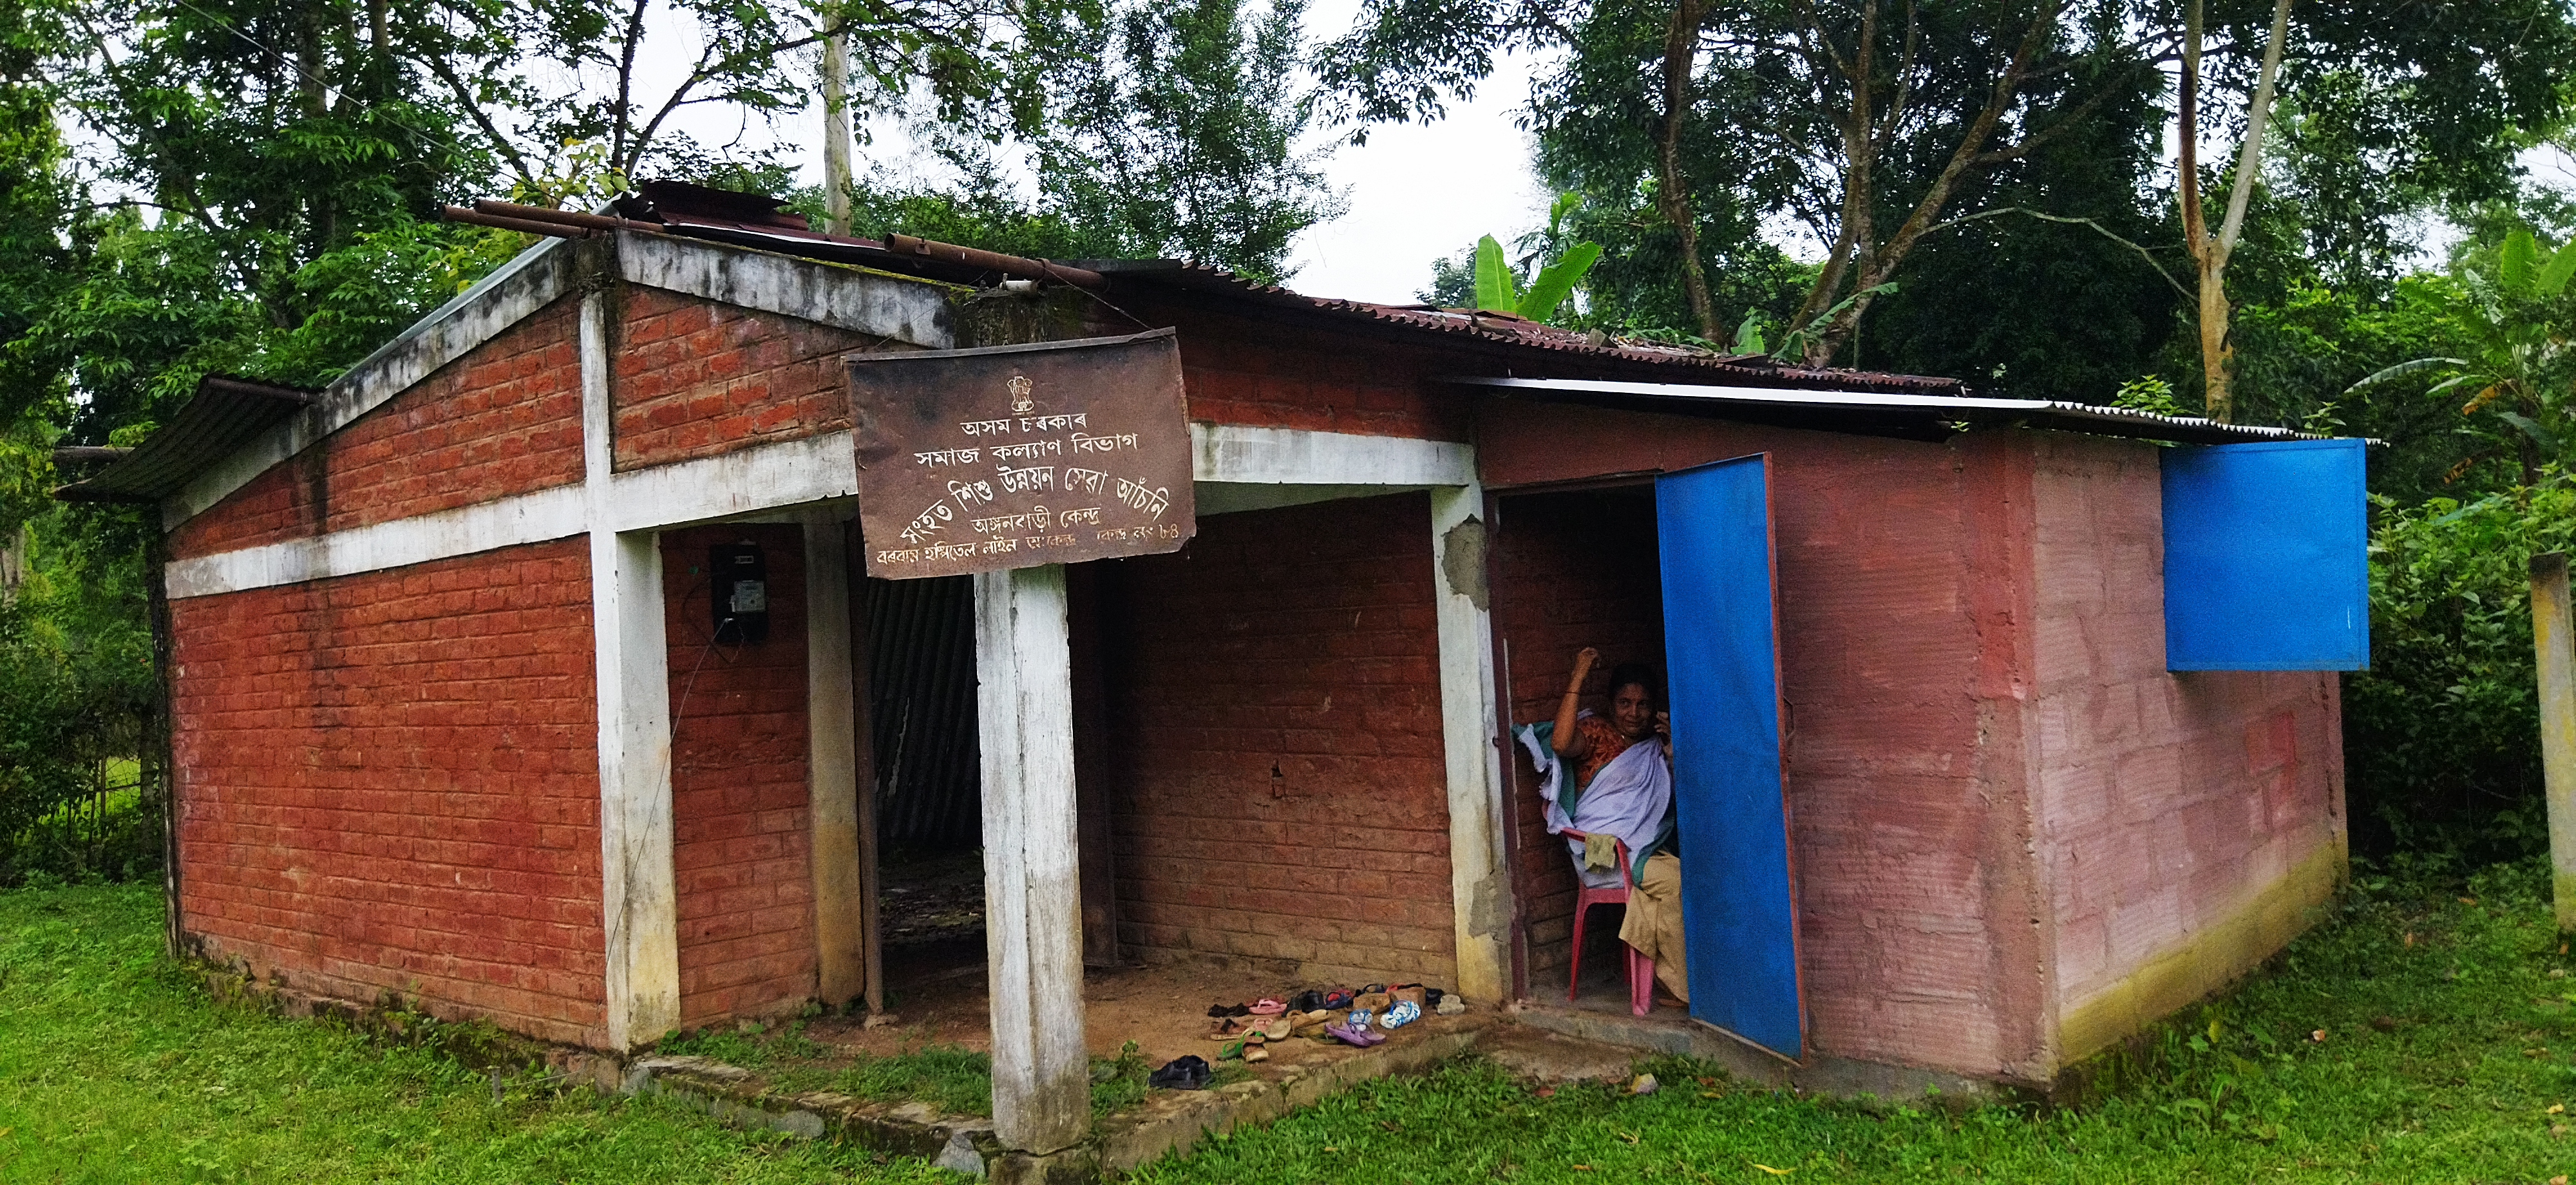 Distressed condition of Anganwadi Centre of Social Welfare Department in Amguri